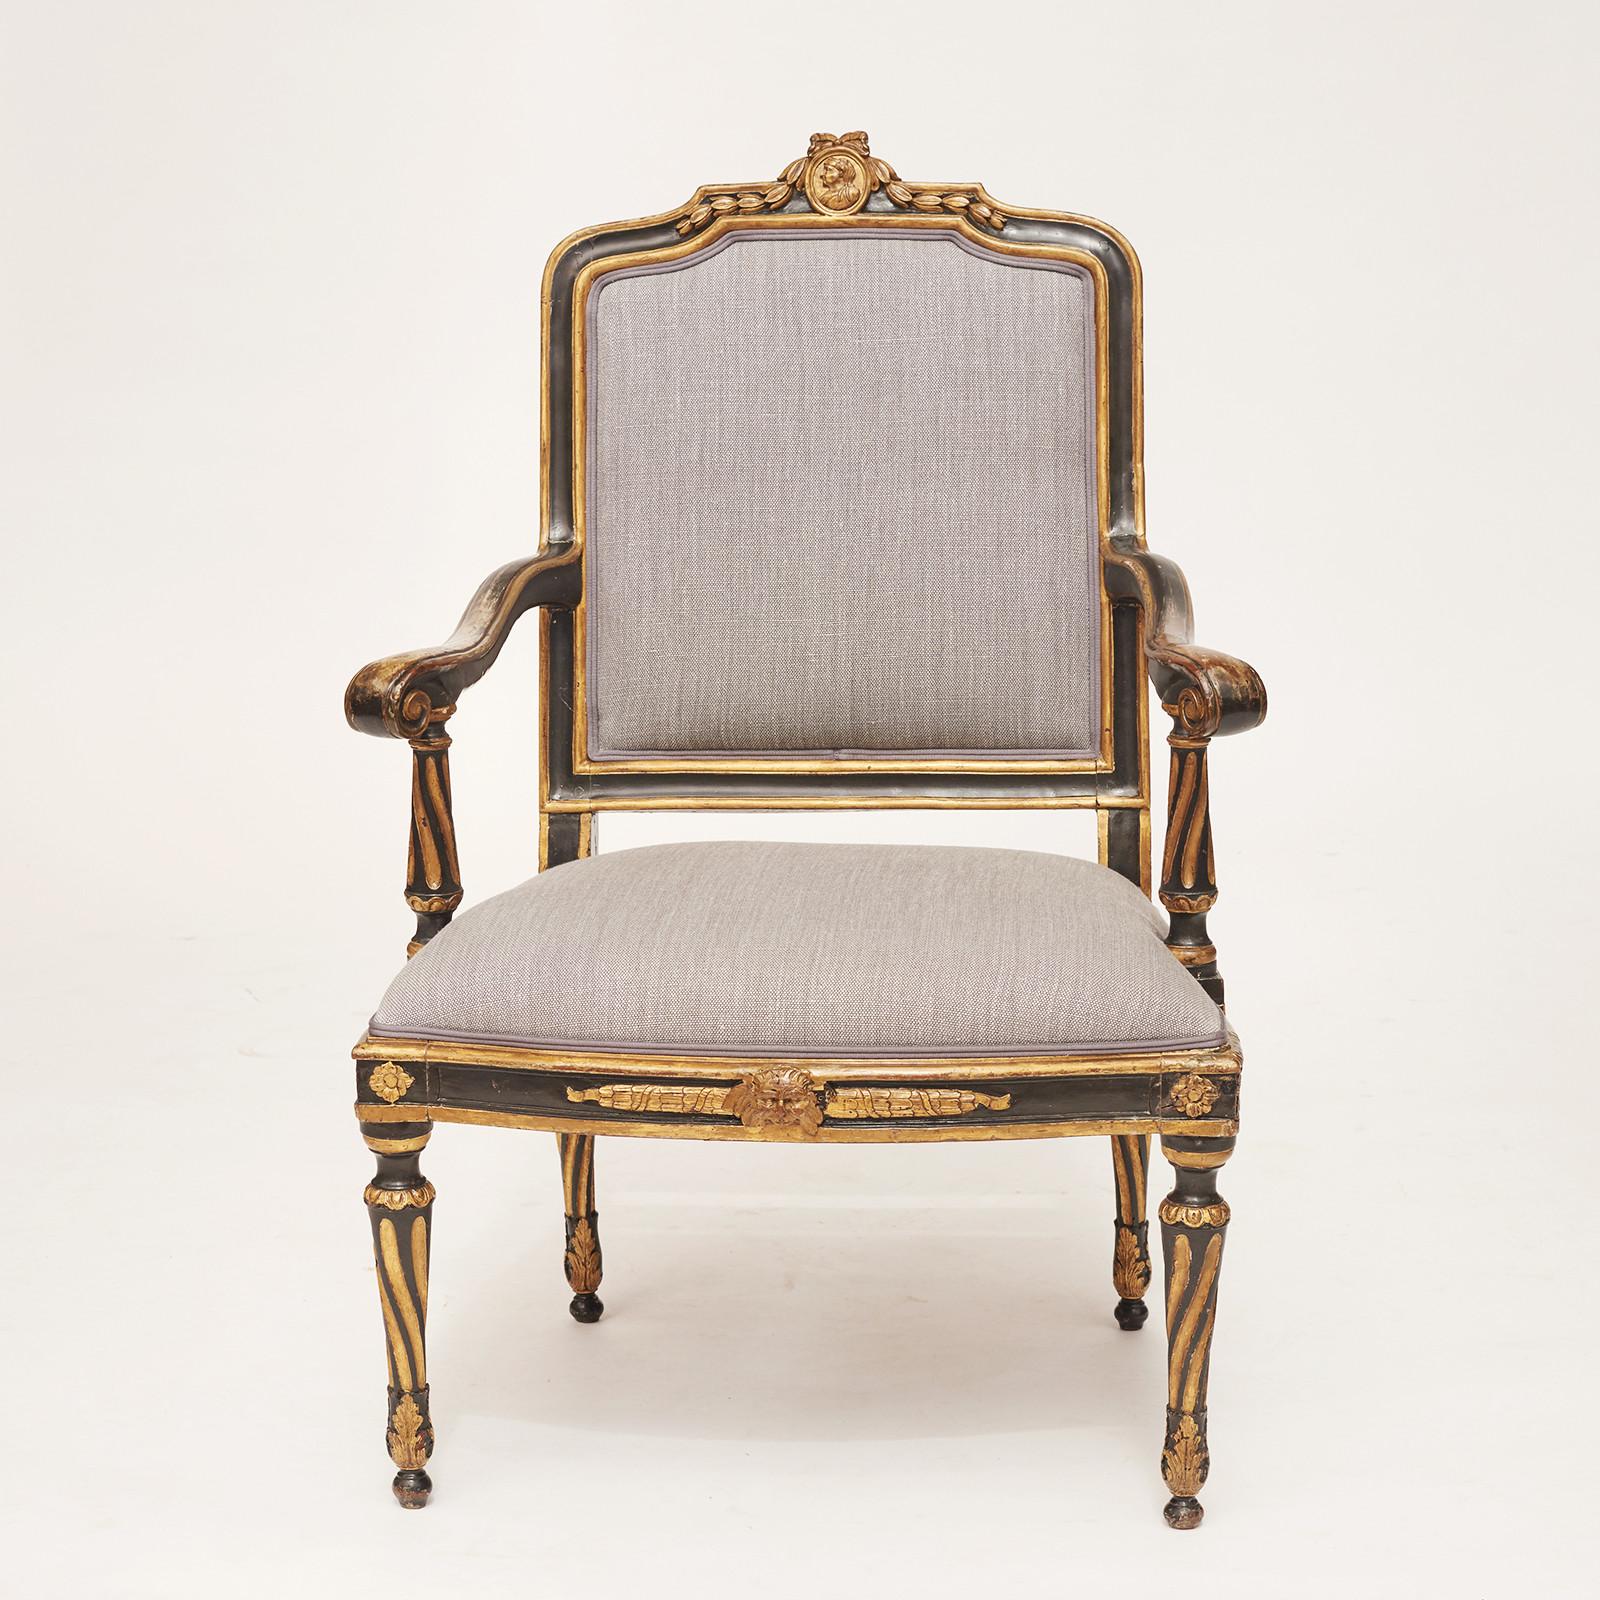 A Danish Louis XVI painted and parcel-gilt Fauteuil a La Reine, approximate 1780s. Classic form with interesting twist carved fluting to the arm supports and legs. New linen fabric by Colefax & Fowler.